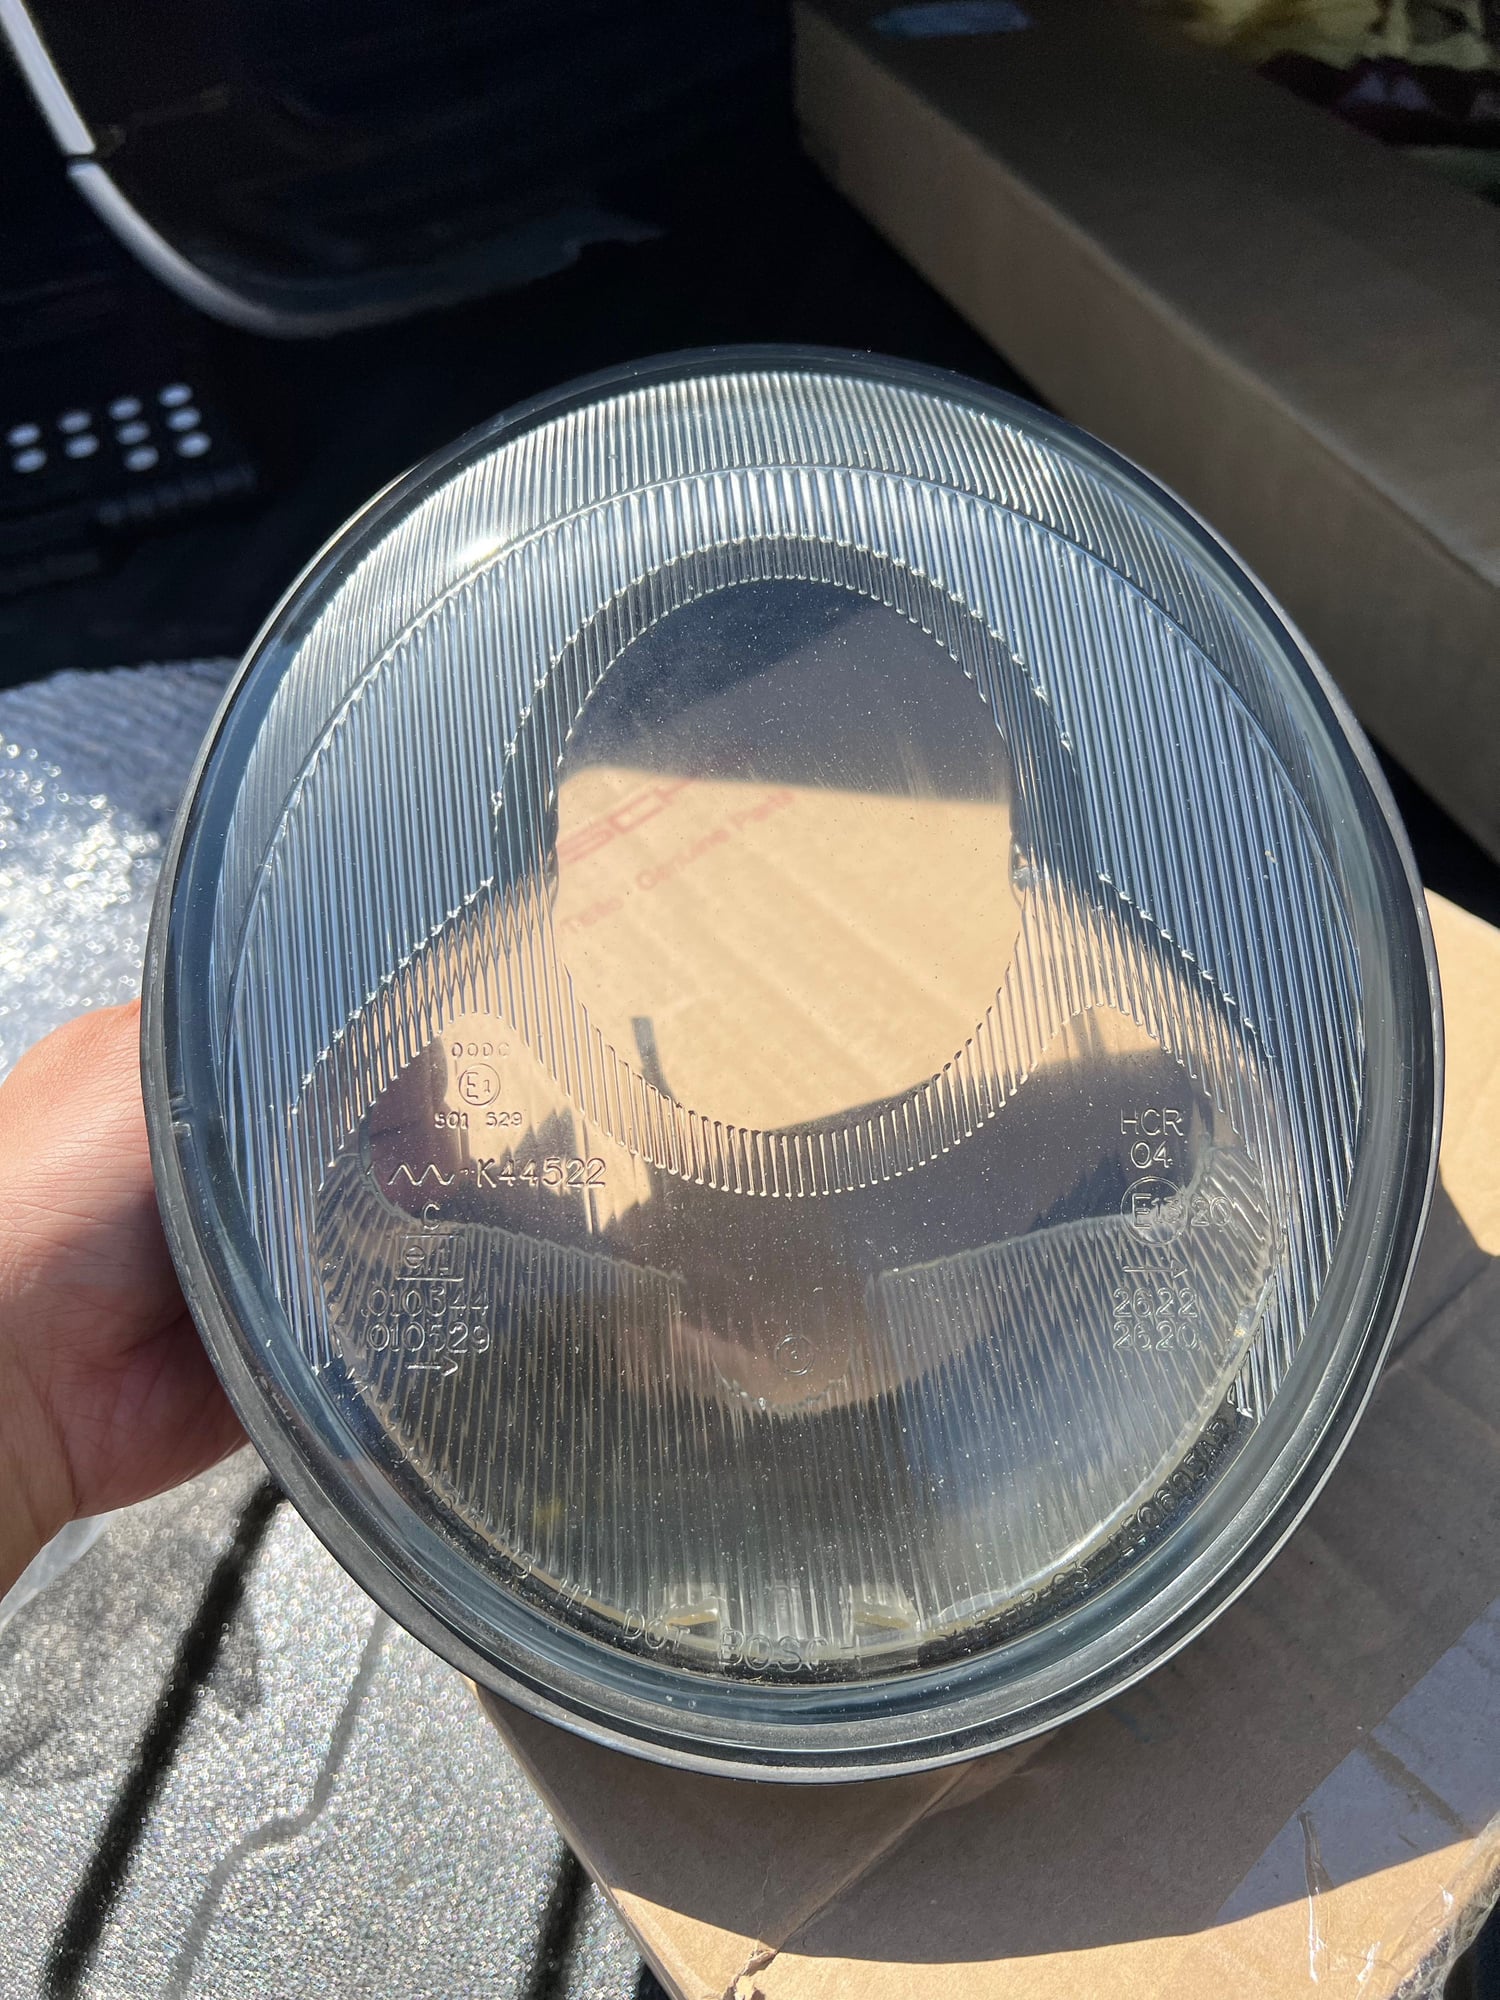 1997 Porsche 911 - Head light lens with gaskets - Accessories - $100 - Carson, CA 90746, United States